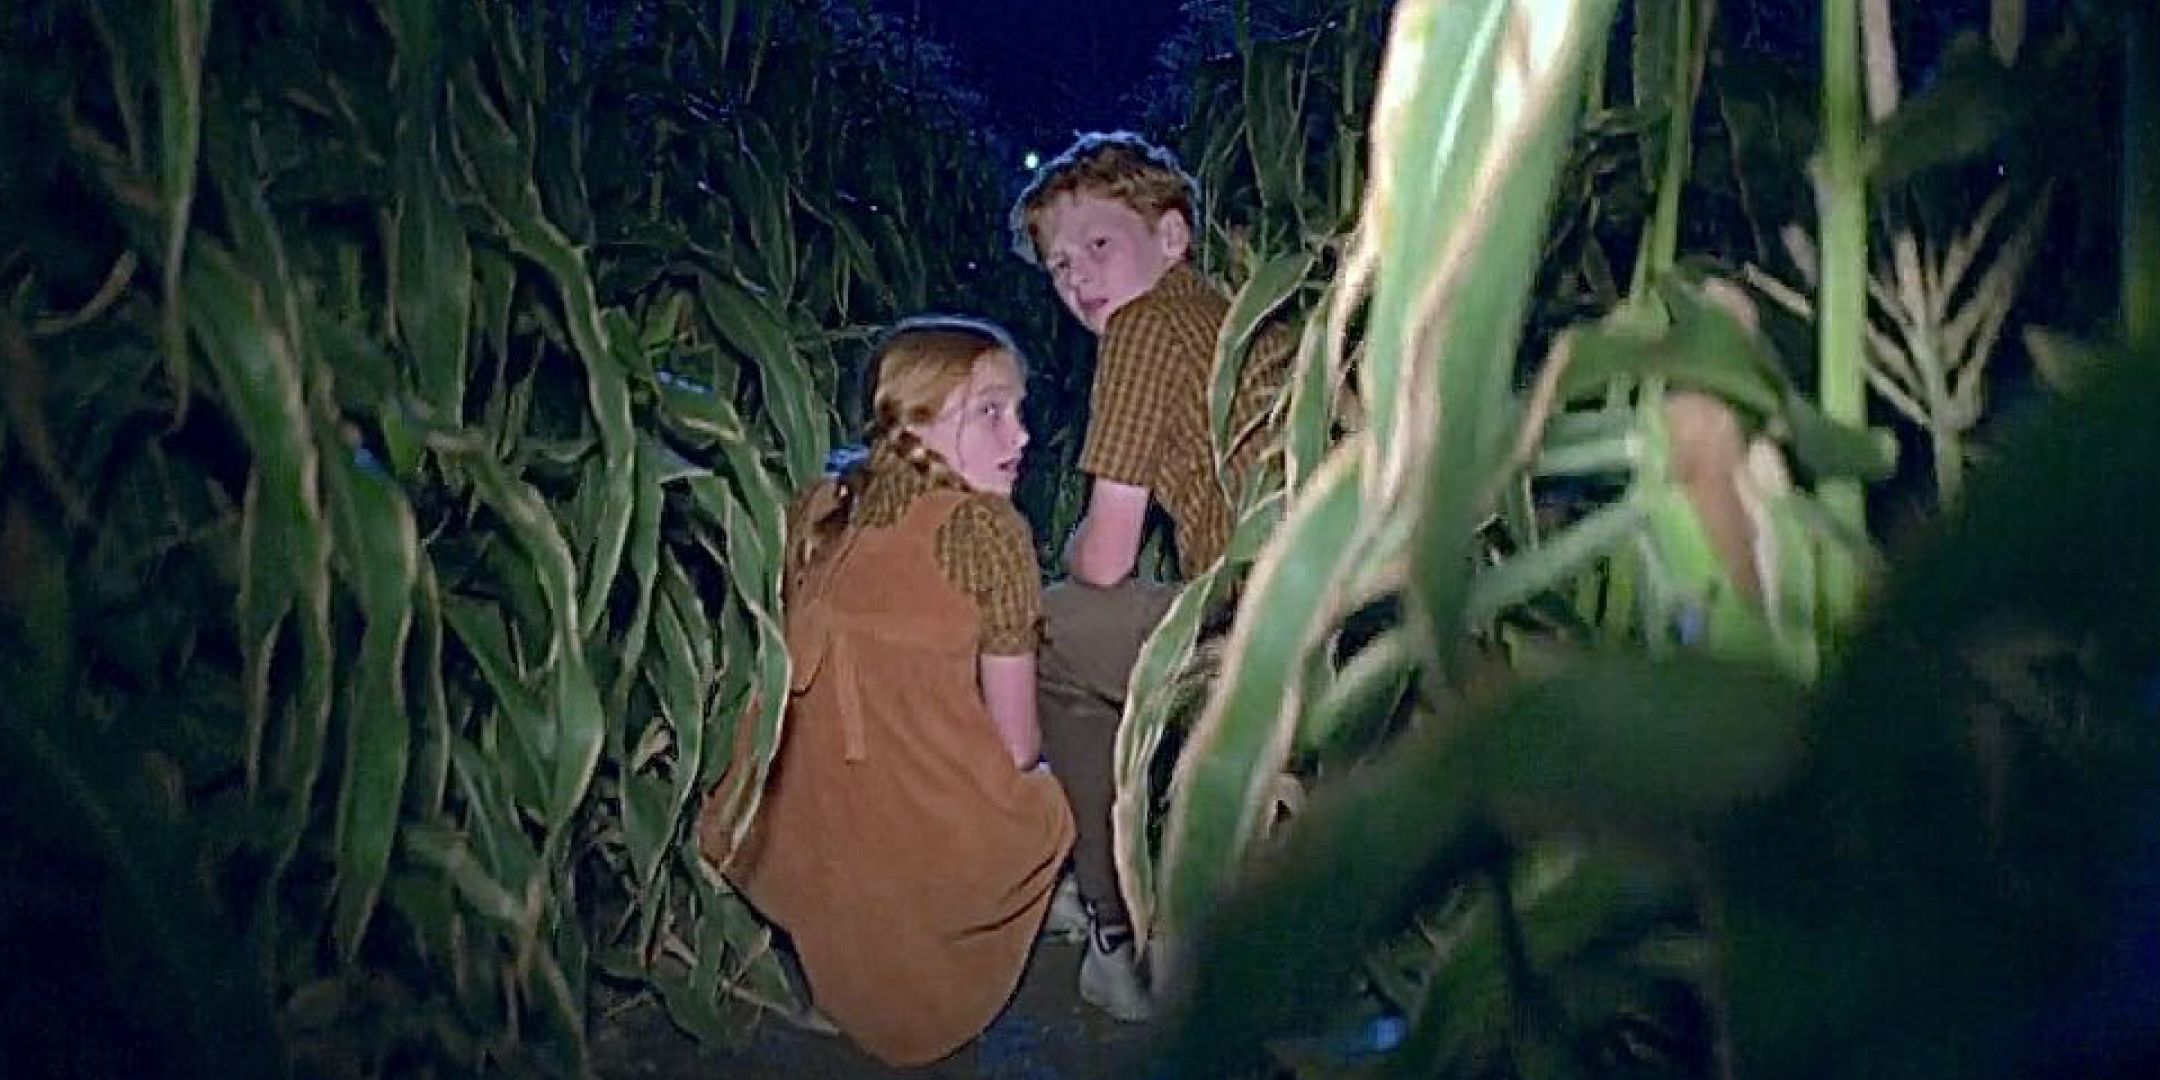 Two children looking at the light behind them in a cornfield in Criminal Minds "Elliott's Pond."